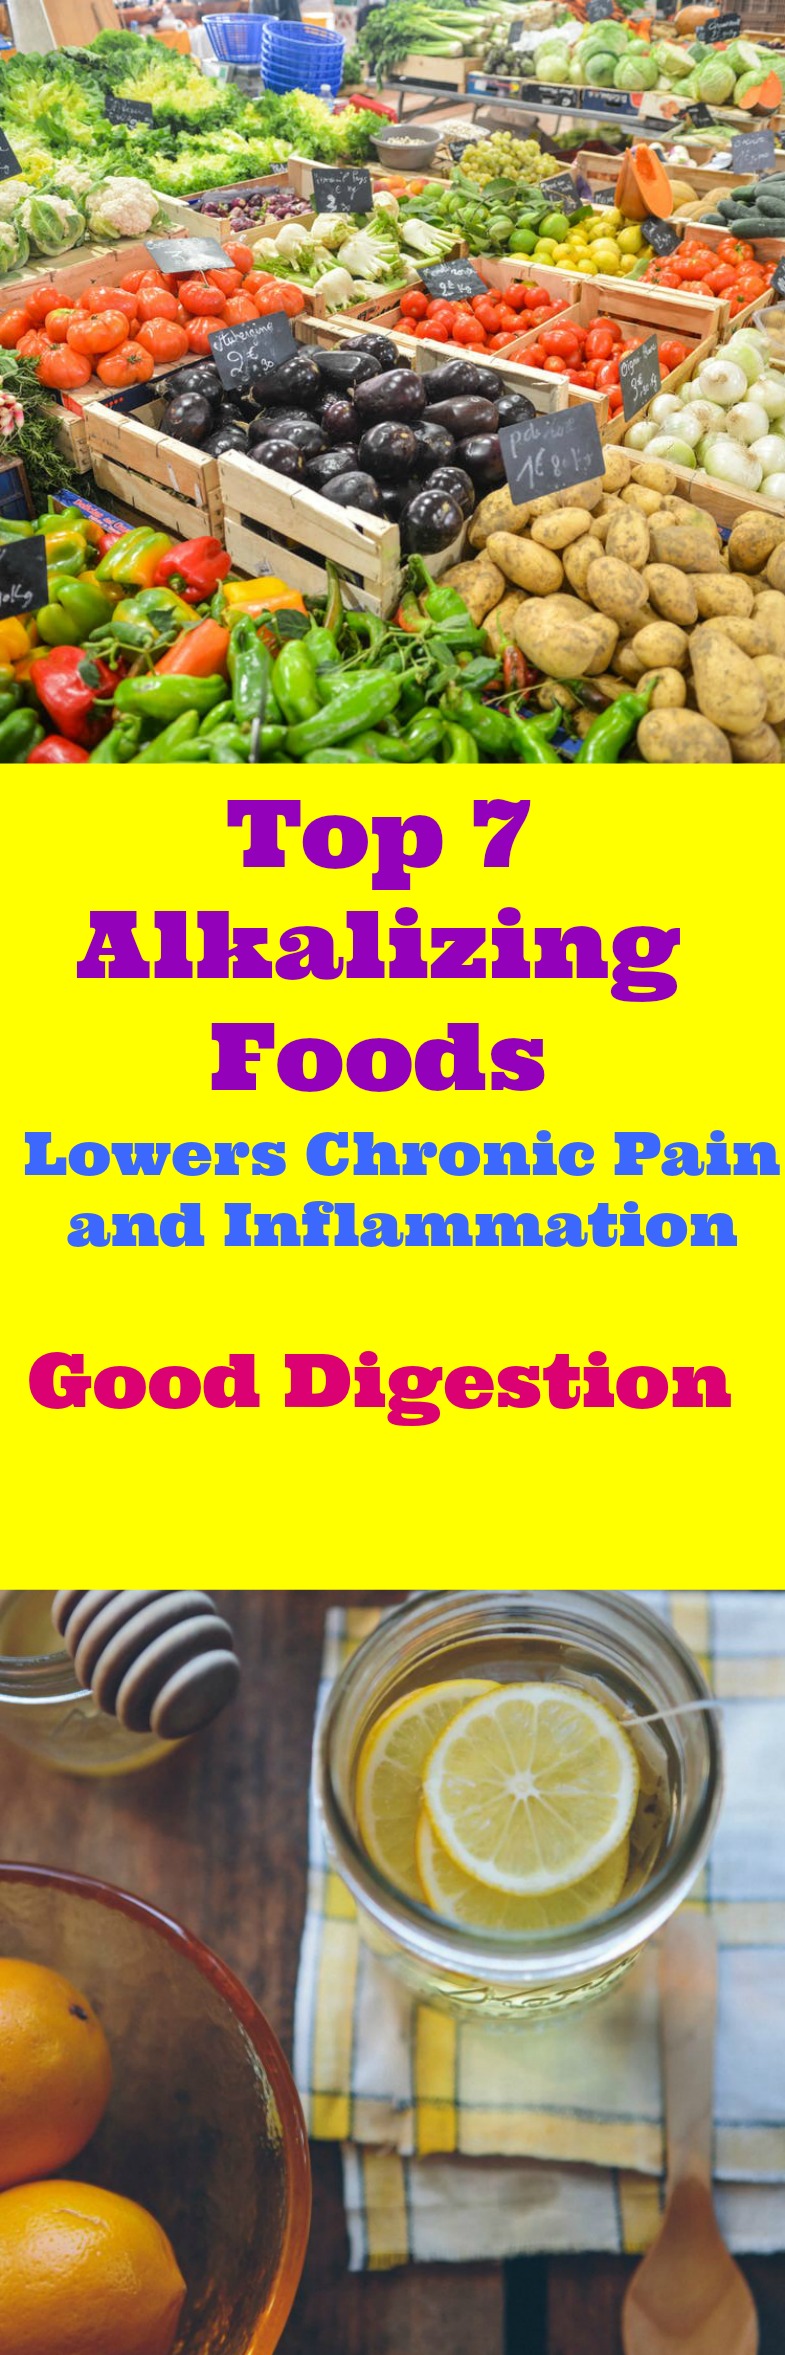 Top 7 Alkalizing Foods to include in your diet. An Alkaline Diet is wonderful for weight loss. The body needs additional health and fitness needs as well.